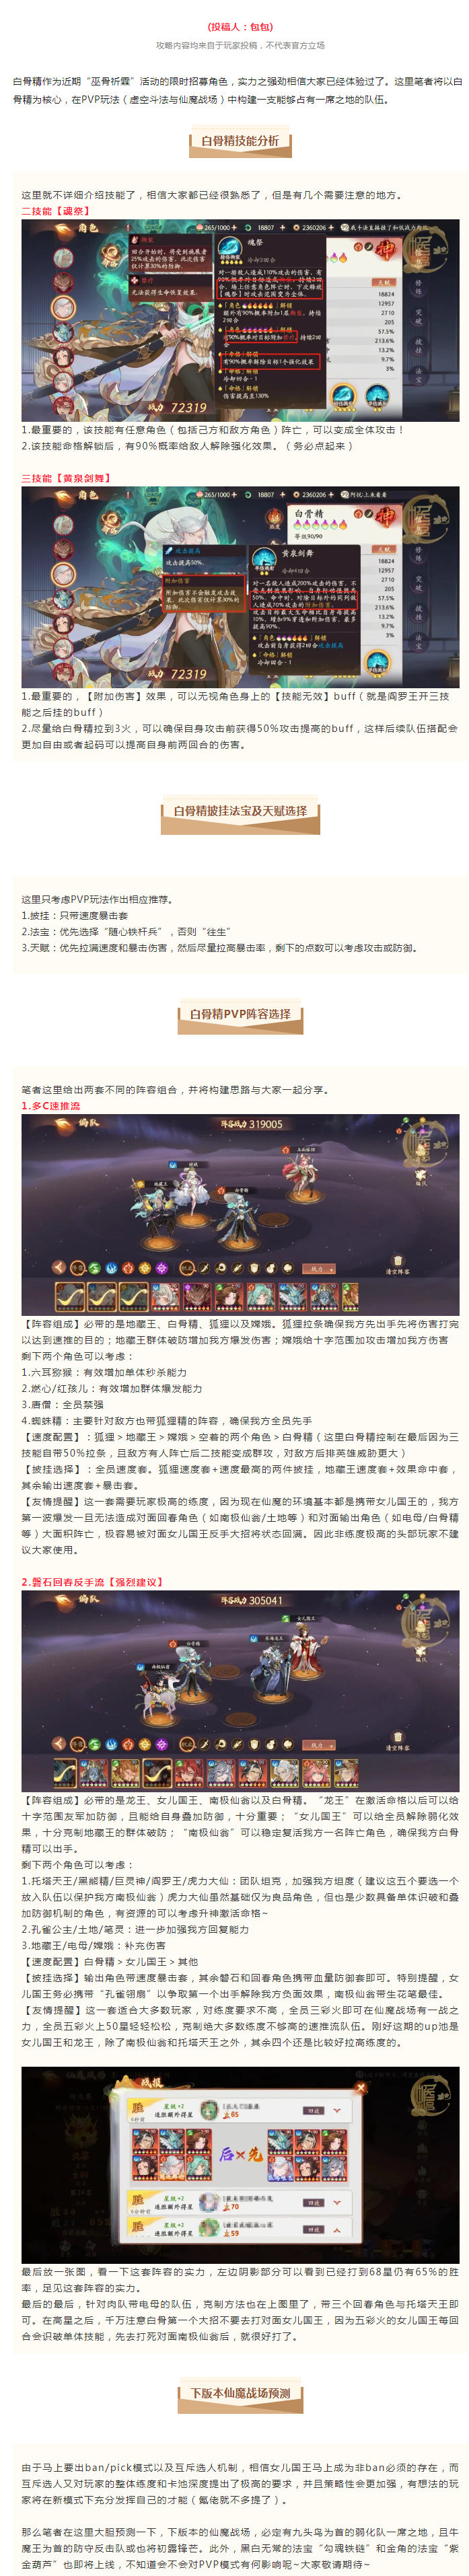  [Recommended lineup] PVP lineup with Baigujing as the core - bag